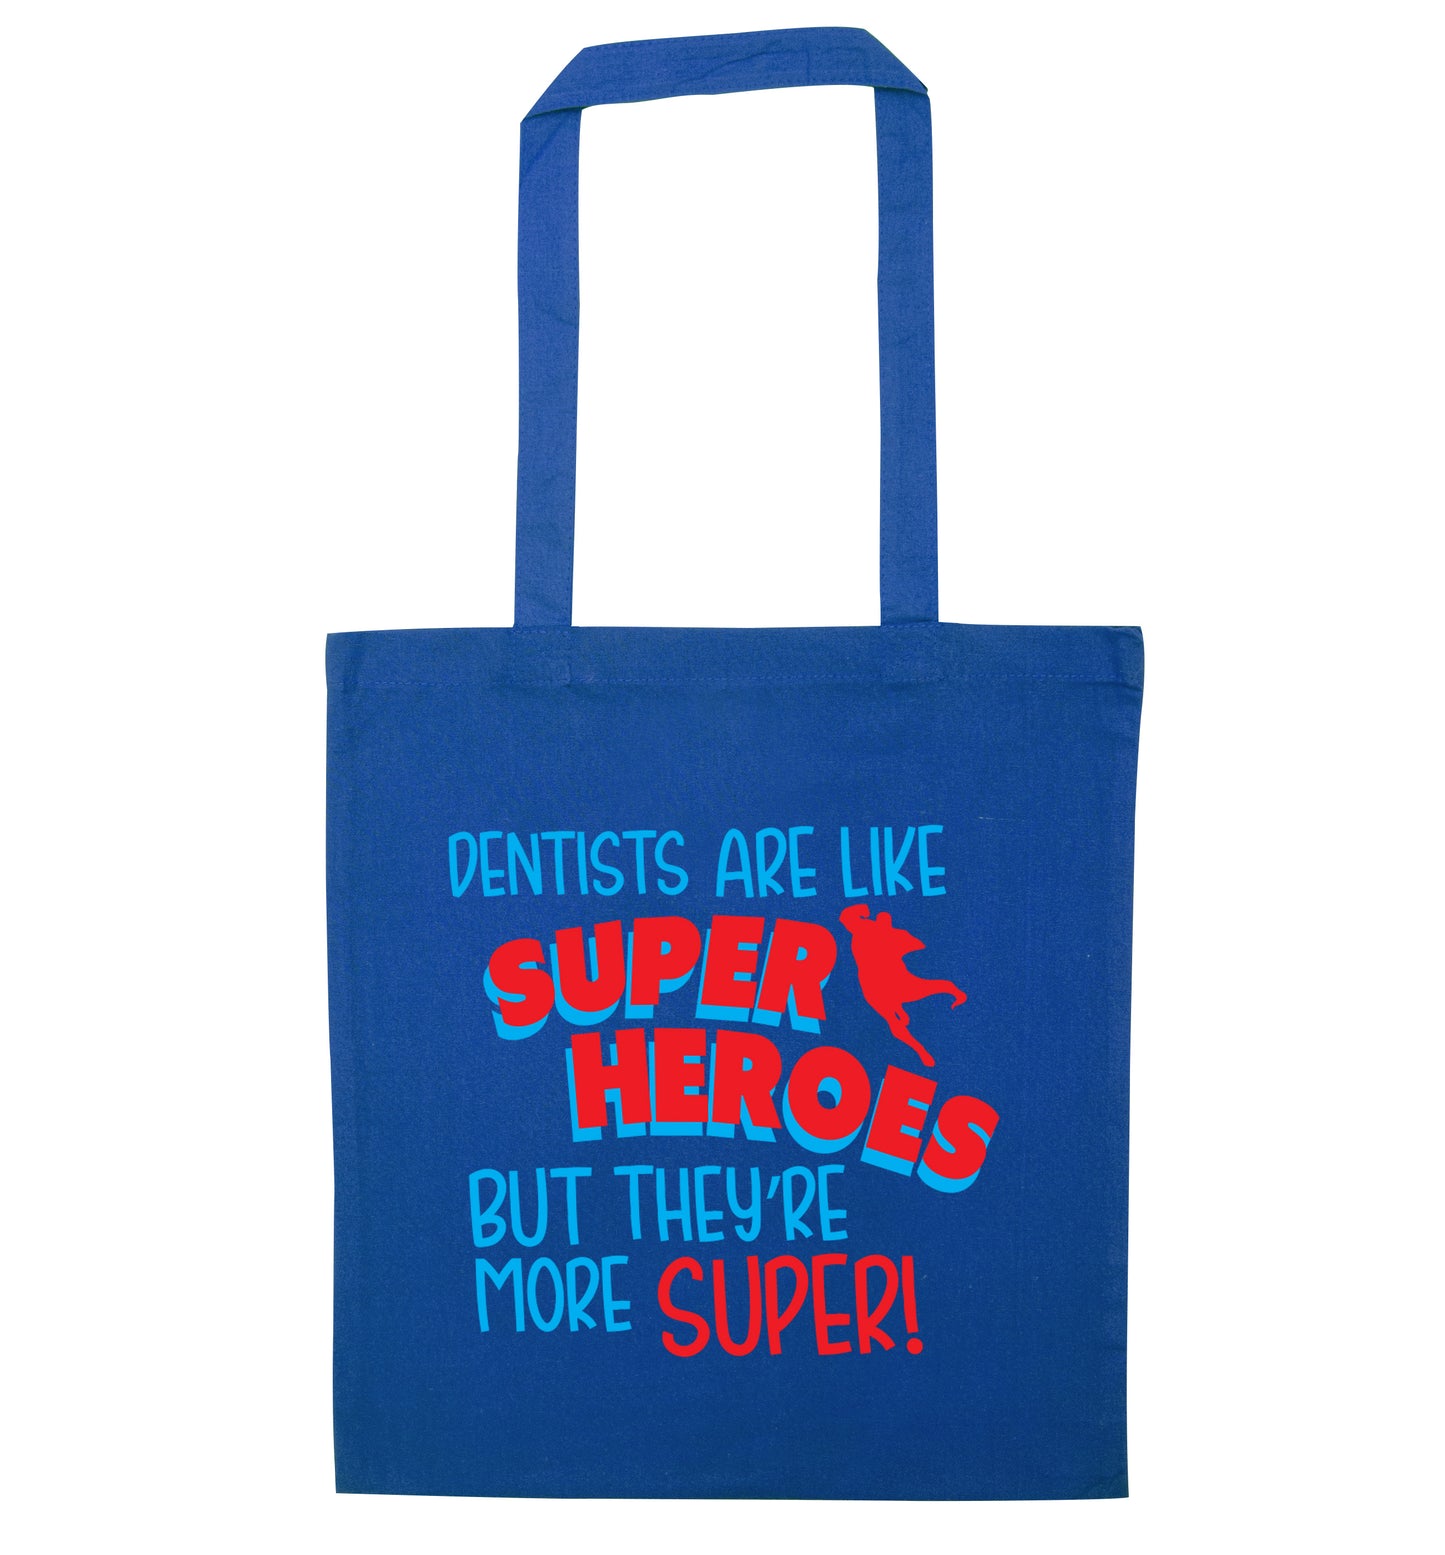 Dentists are like superheros but they're more super blue tote bag